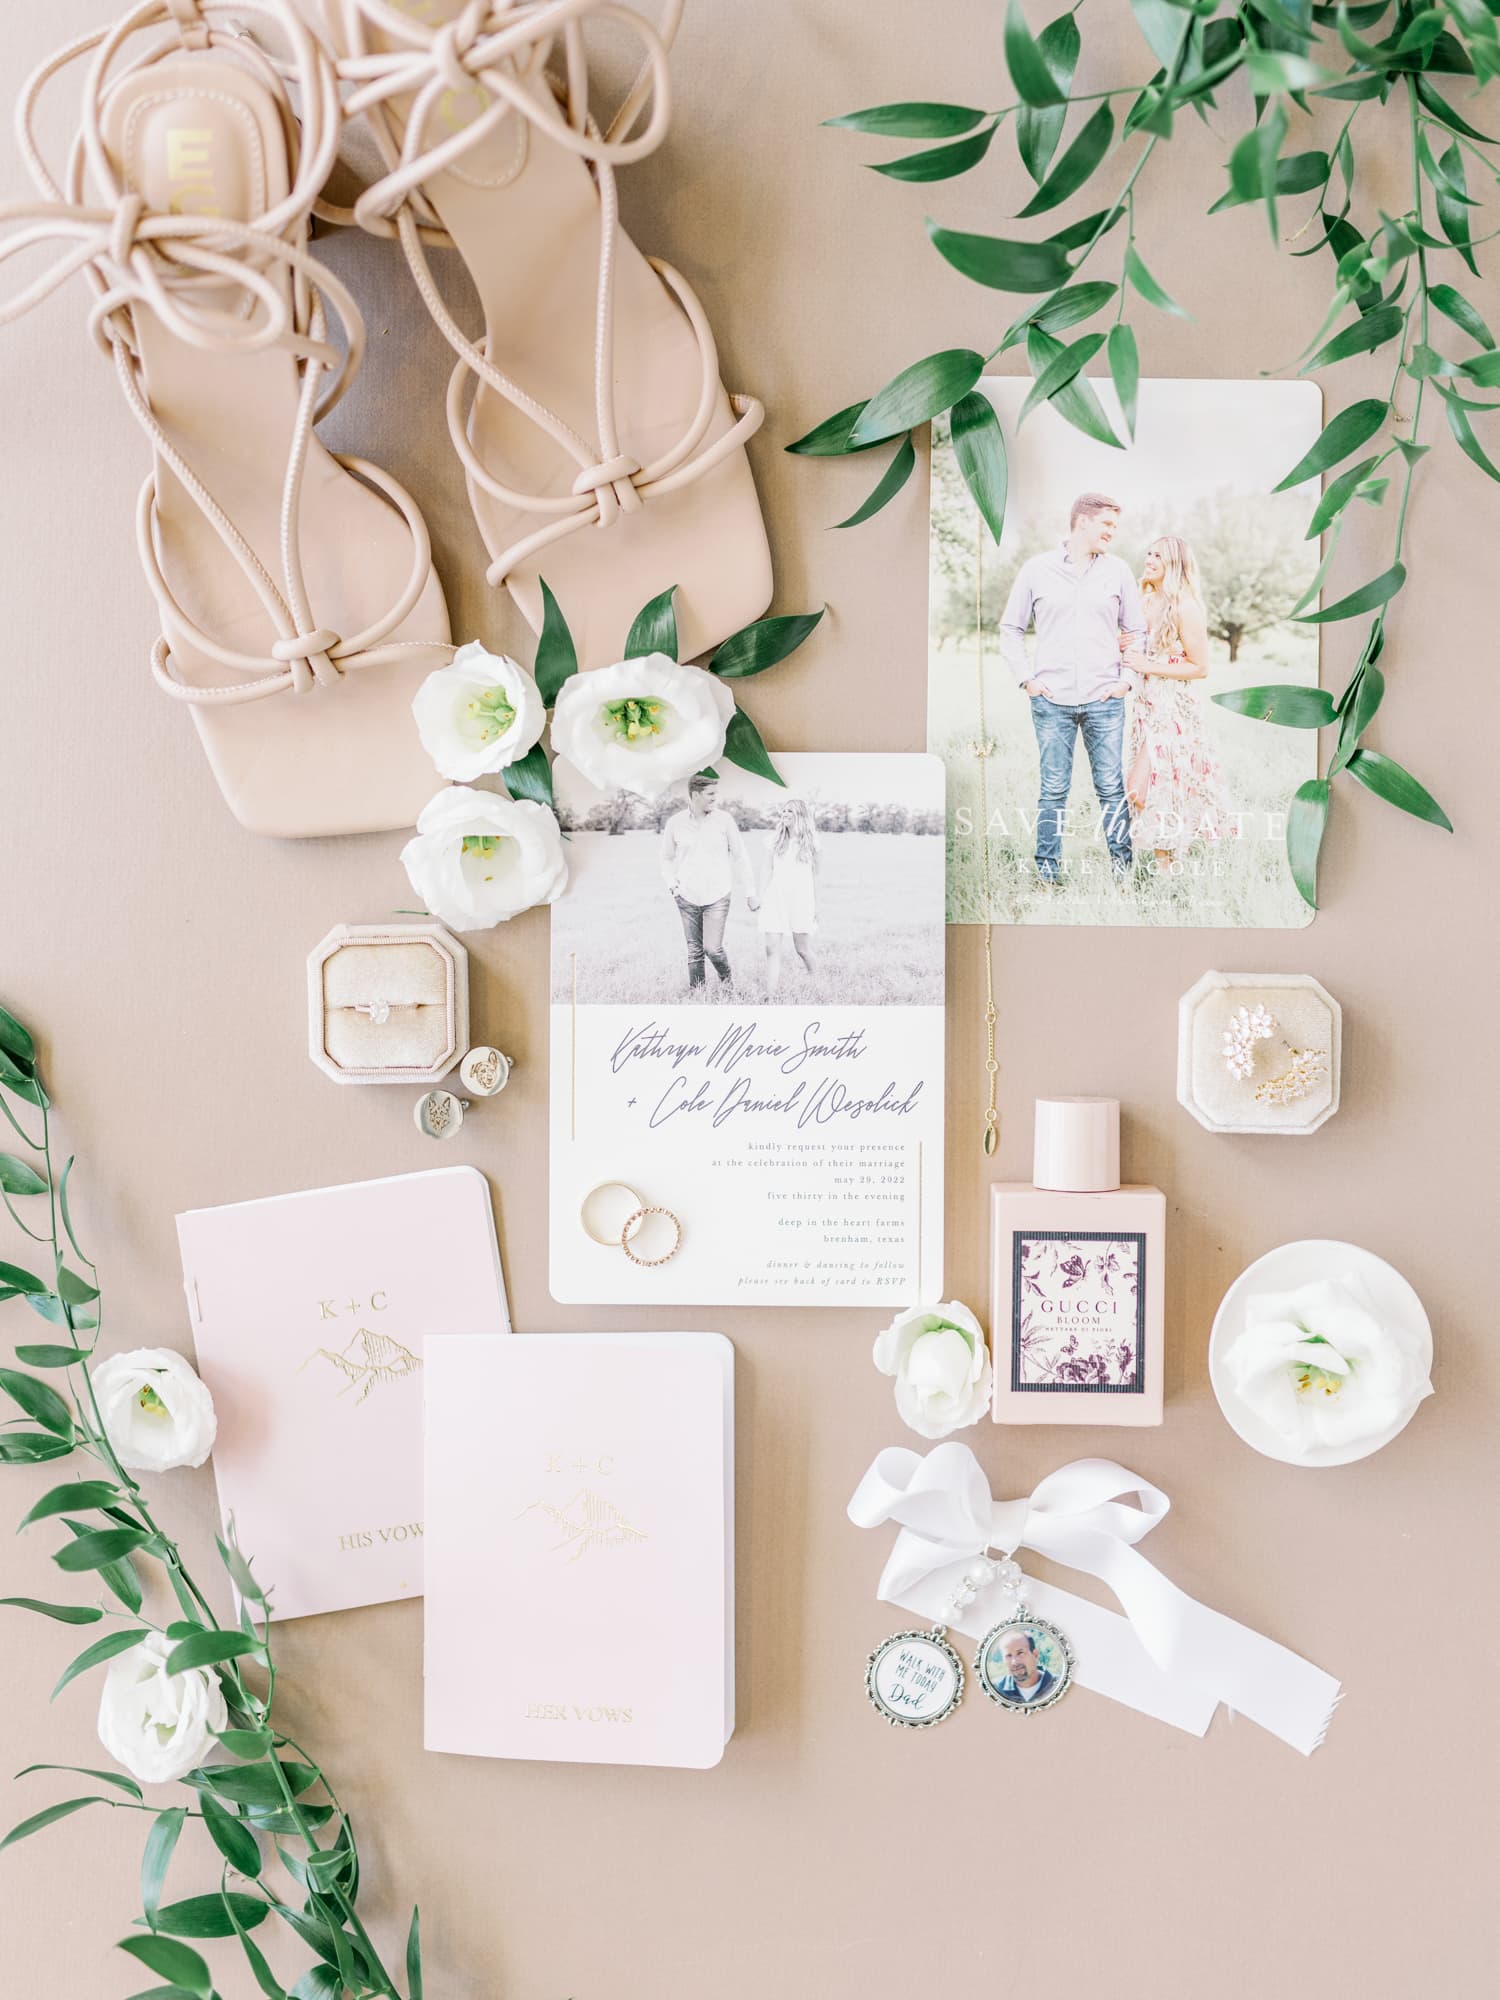 Wedding detail suite with invitation, save the date, earrings, florals and vow books.